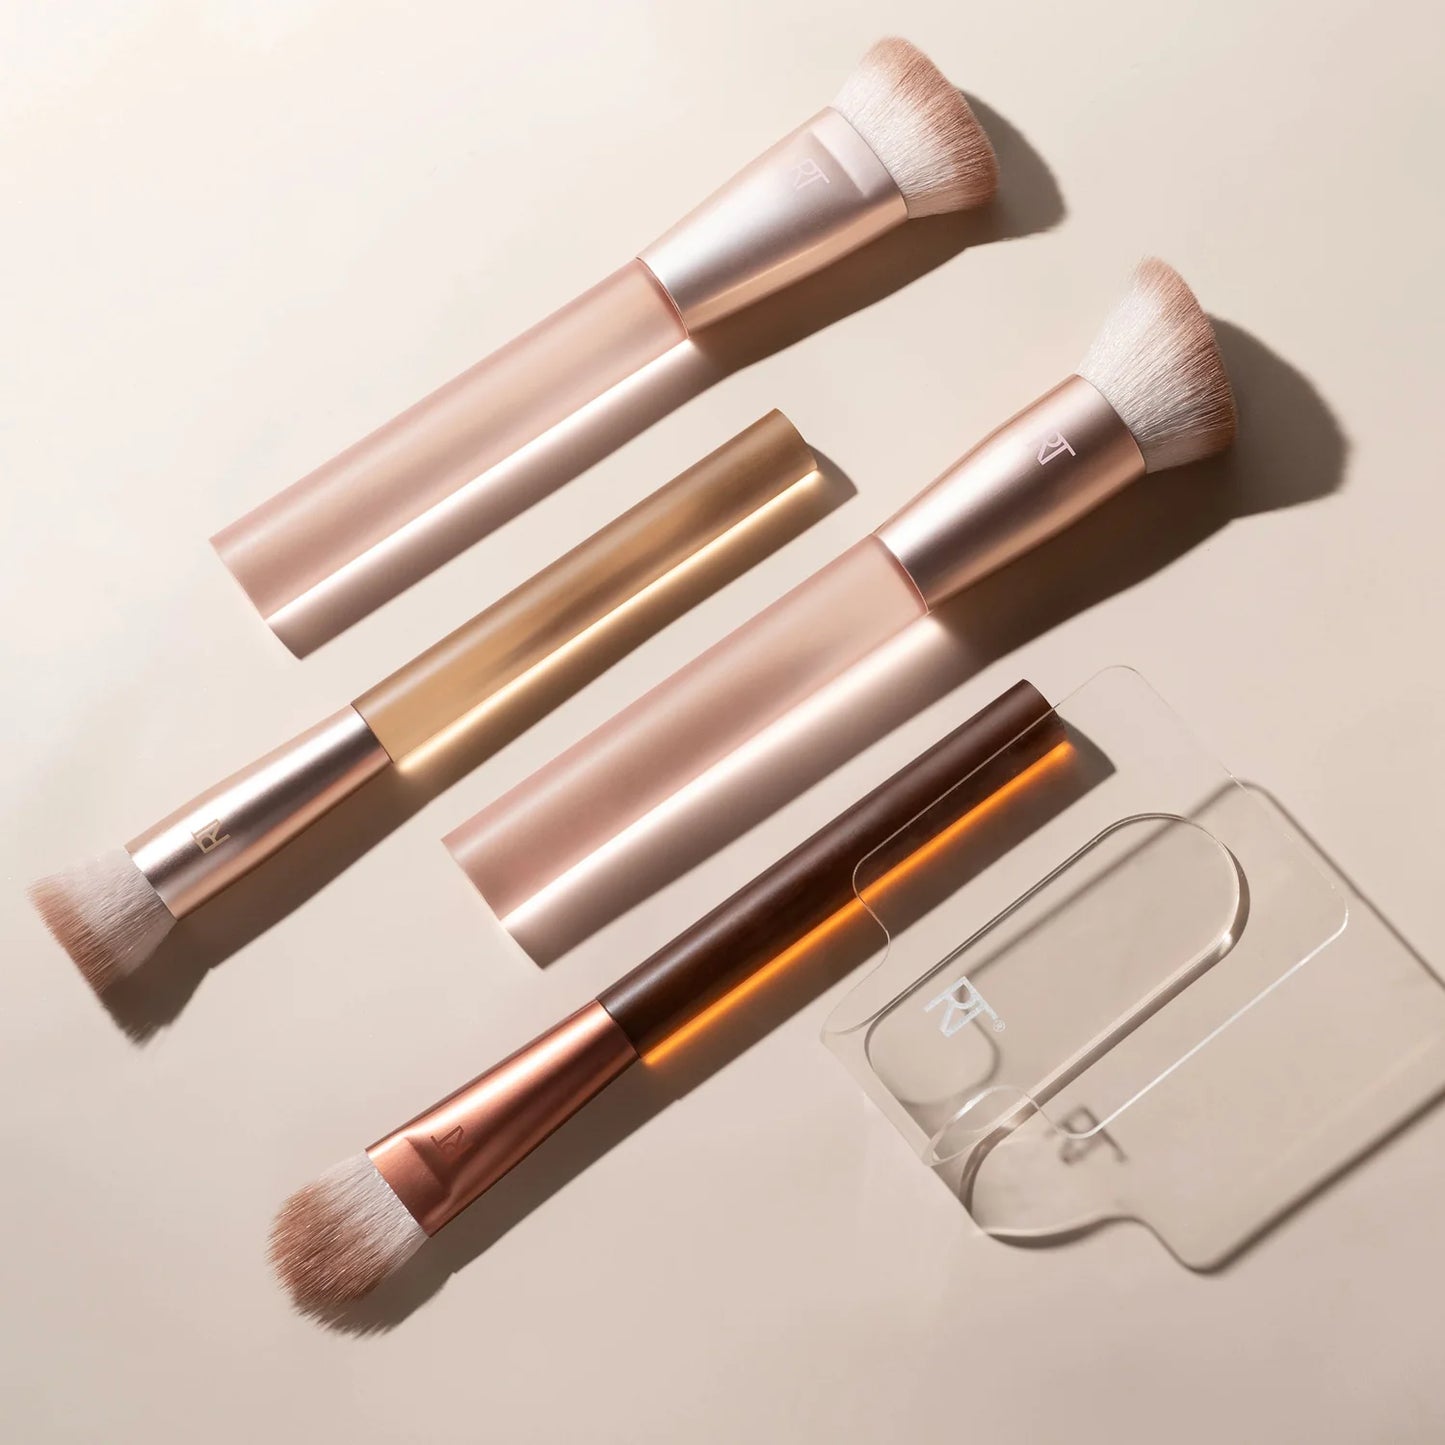 Real Techniques New Nudes Nothing But You Face Kit